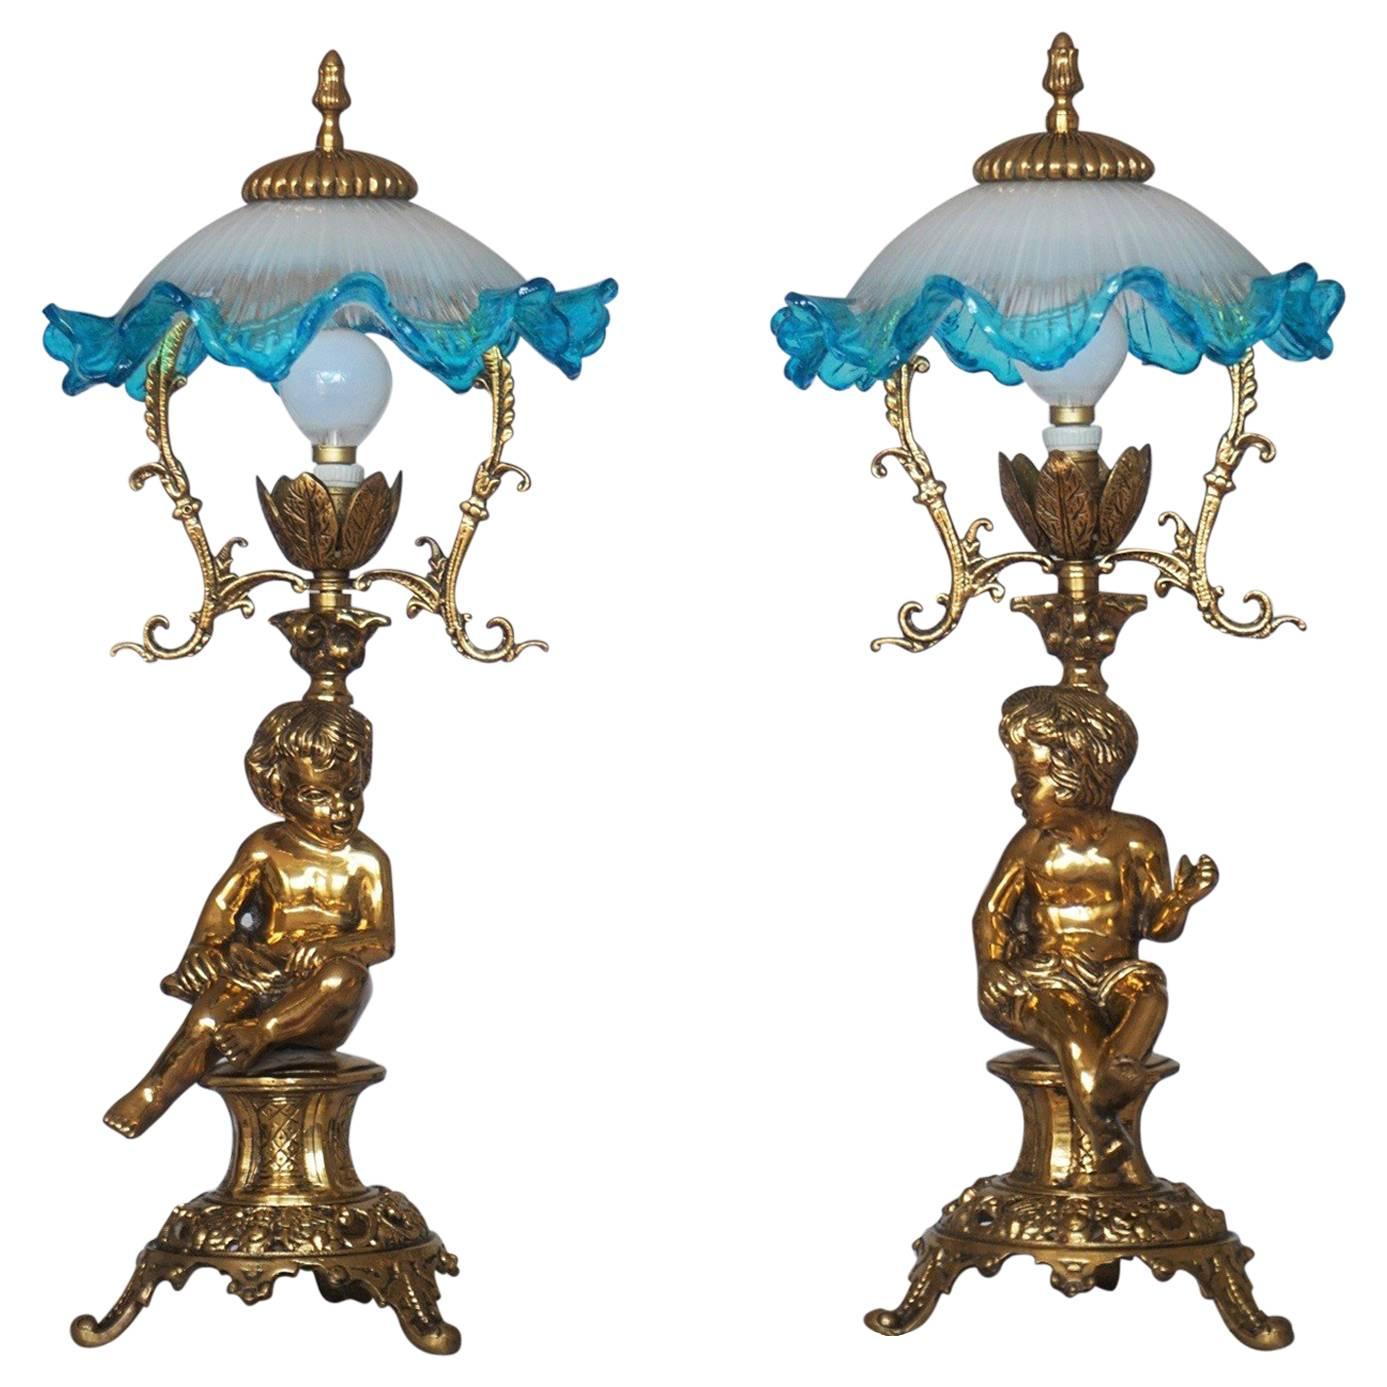 Pair of Solid Brass Cherub Table Lamps Art Nouveau Style, circa 1920